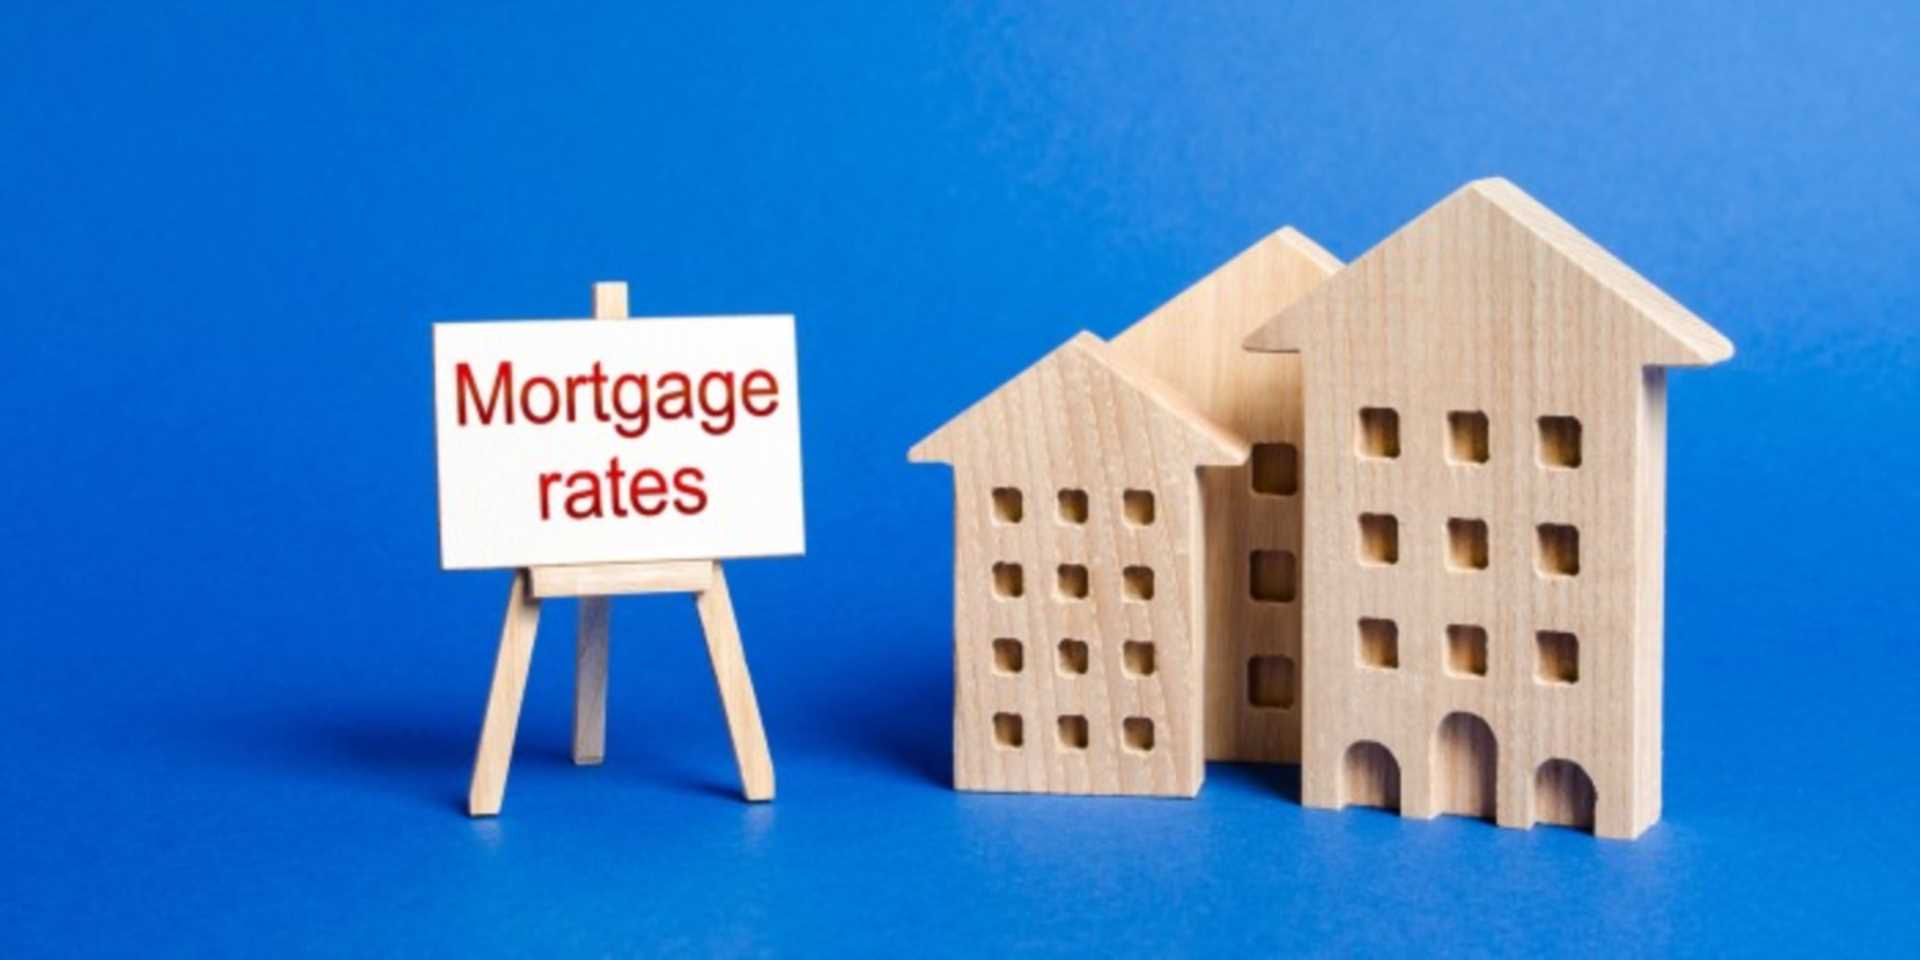 Interest on fixed rate mortgage deals falls.